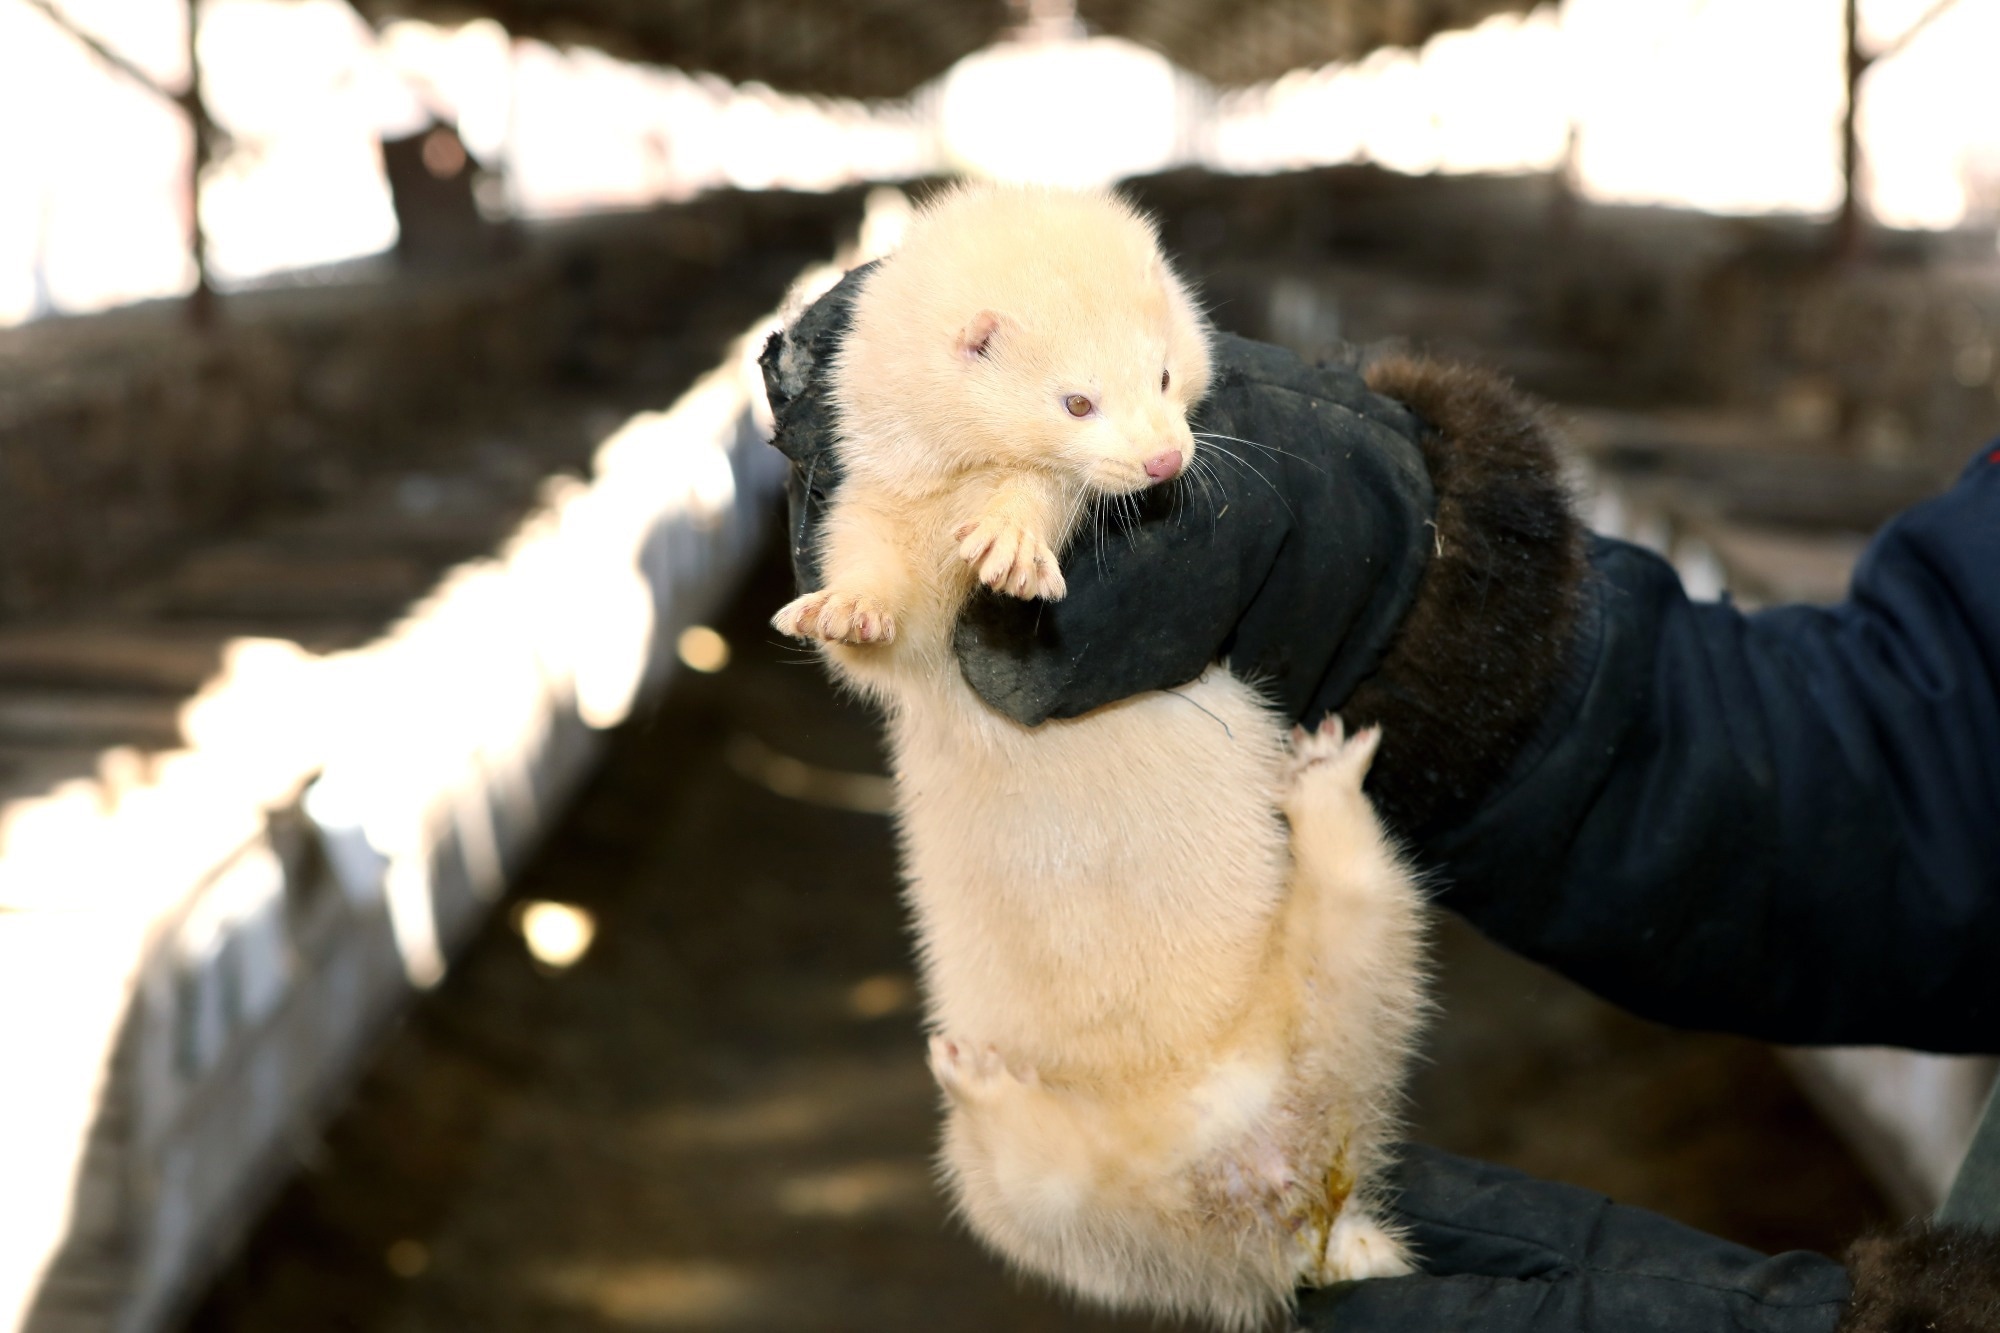 First identified epidemic of extremely pathogenic avian influenza H5N1 in farmed mink